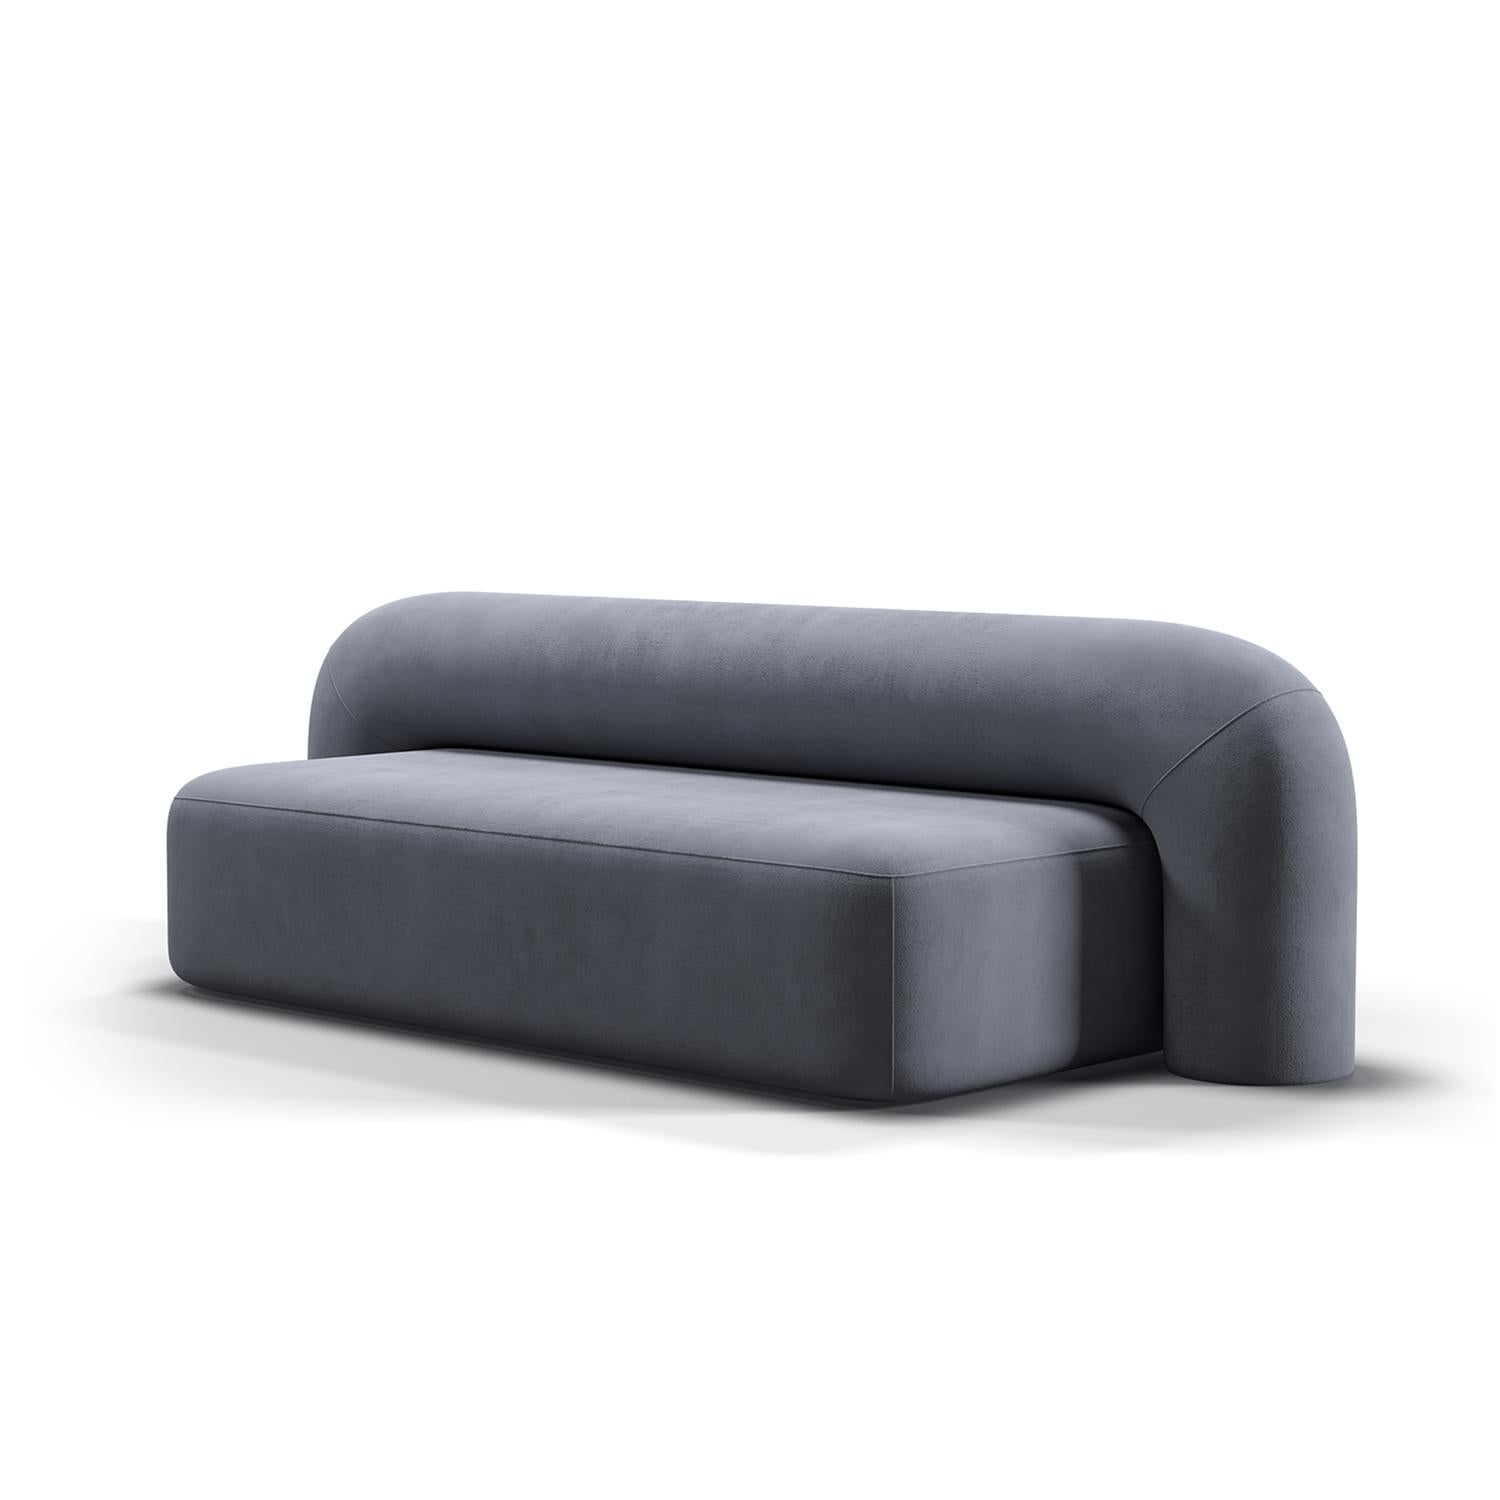 Moss 2400 Sofa by Artu
Pavel Vetrov
Dimensions: W 240 x D 82 x H 76 cm
Materials: Wood, Upholstery
Other colors and materials available. Please contact us.

Soft, flowing, tactile forms of the new Moss collection are inspired by moss that